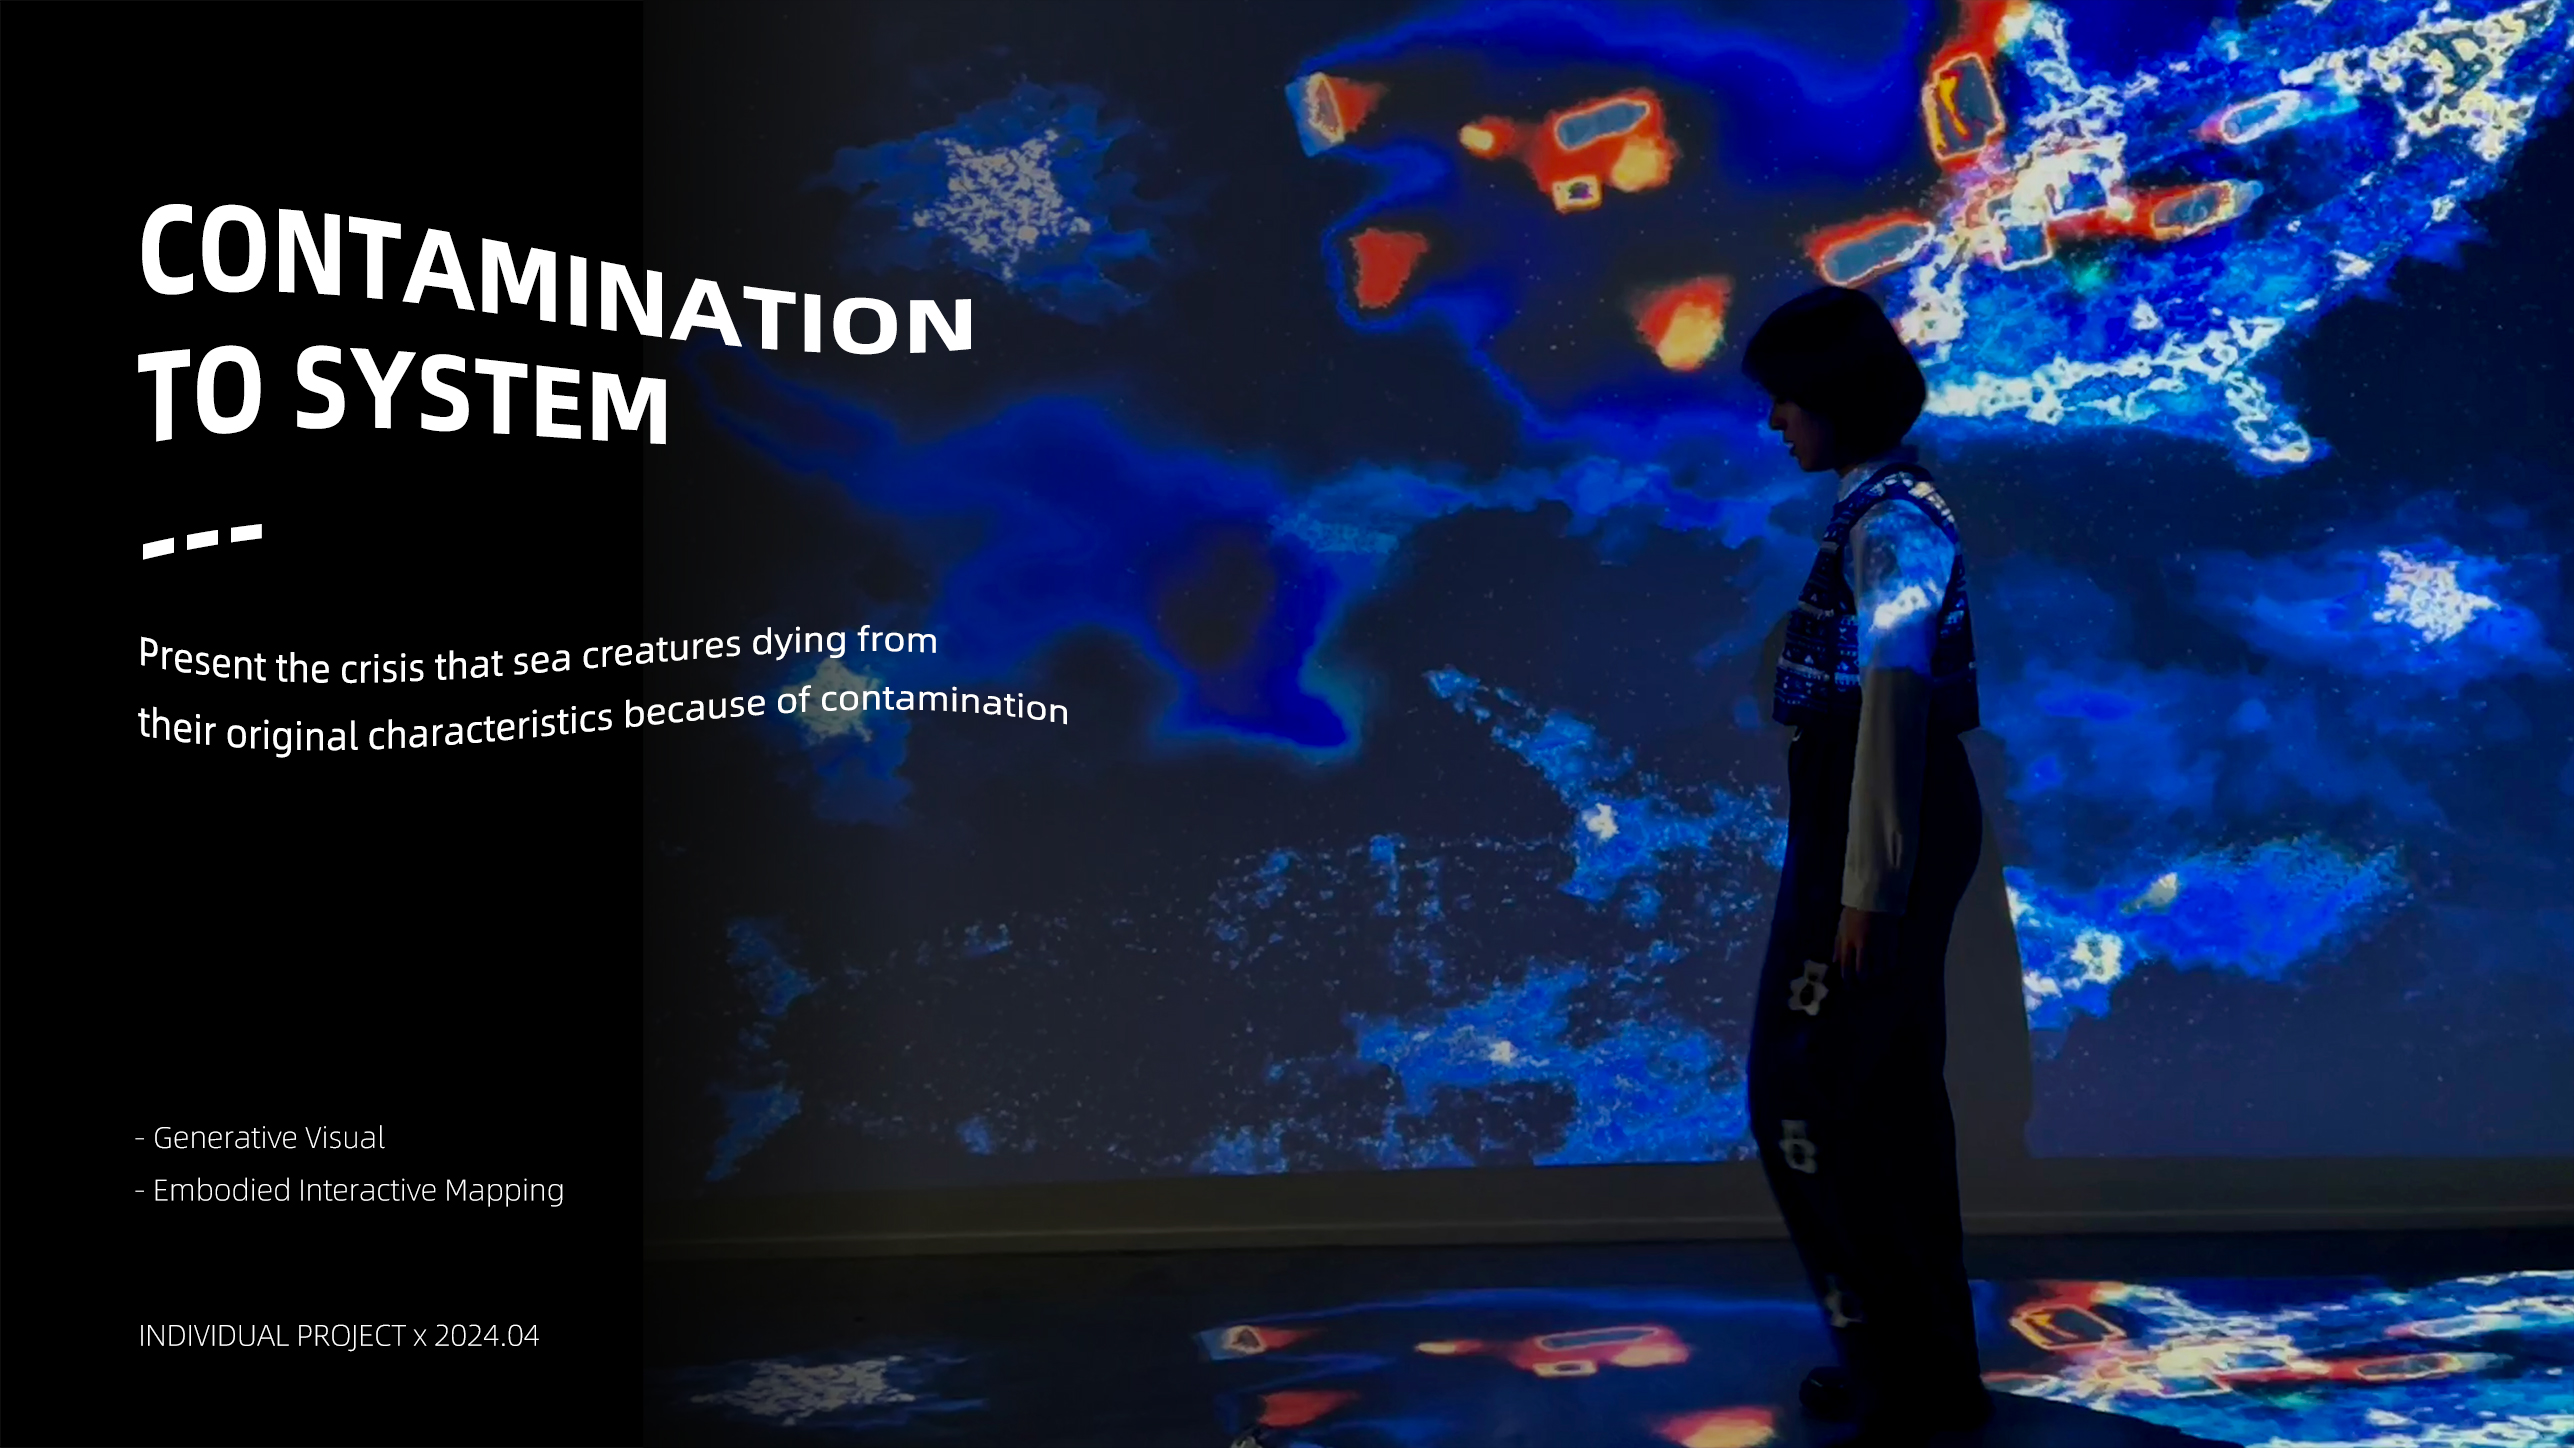 An Embodied Interactive Mapping with Real-time Generative Visual